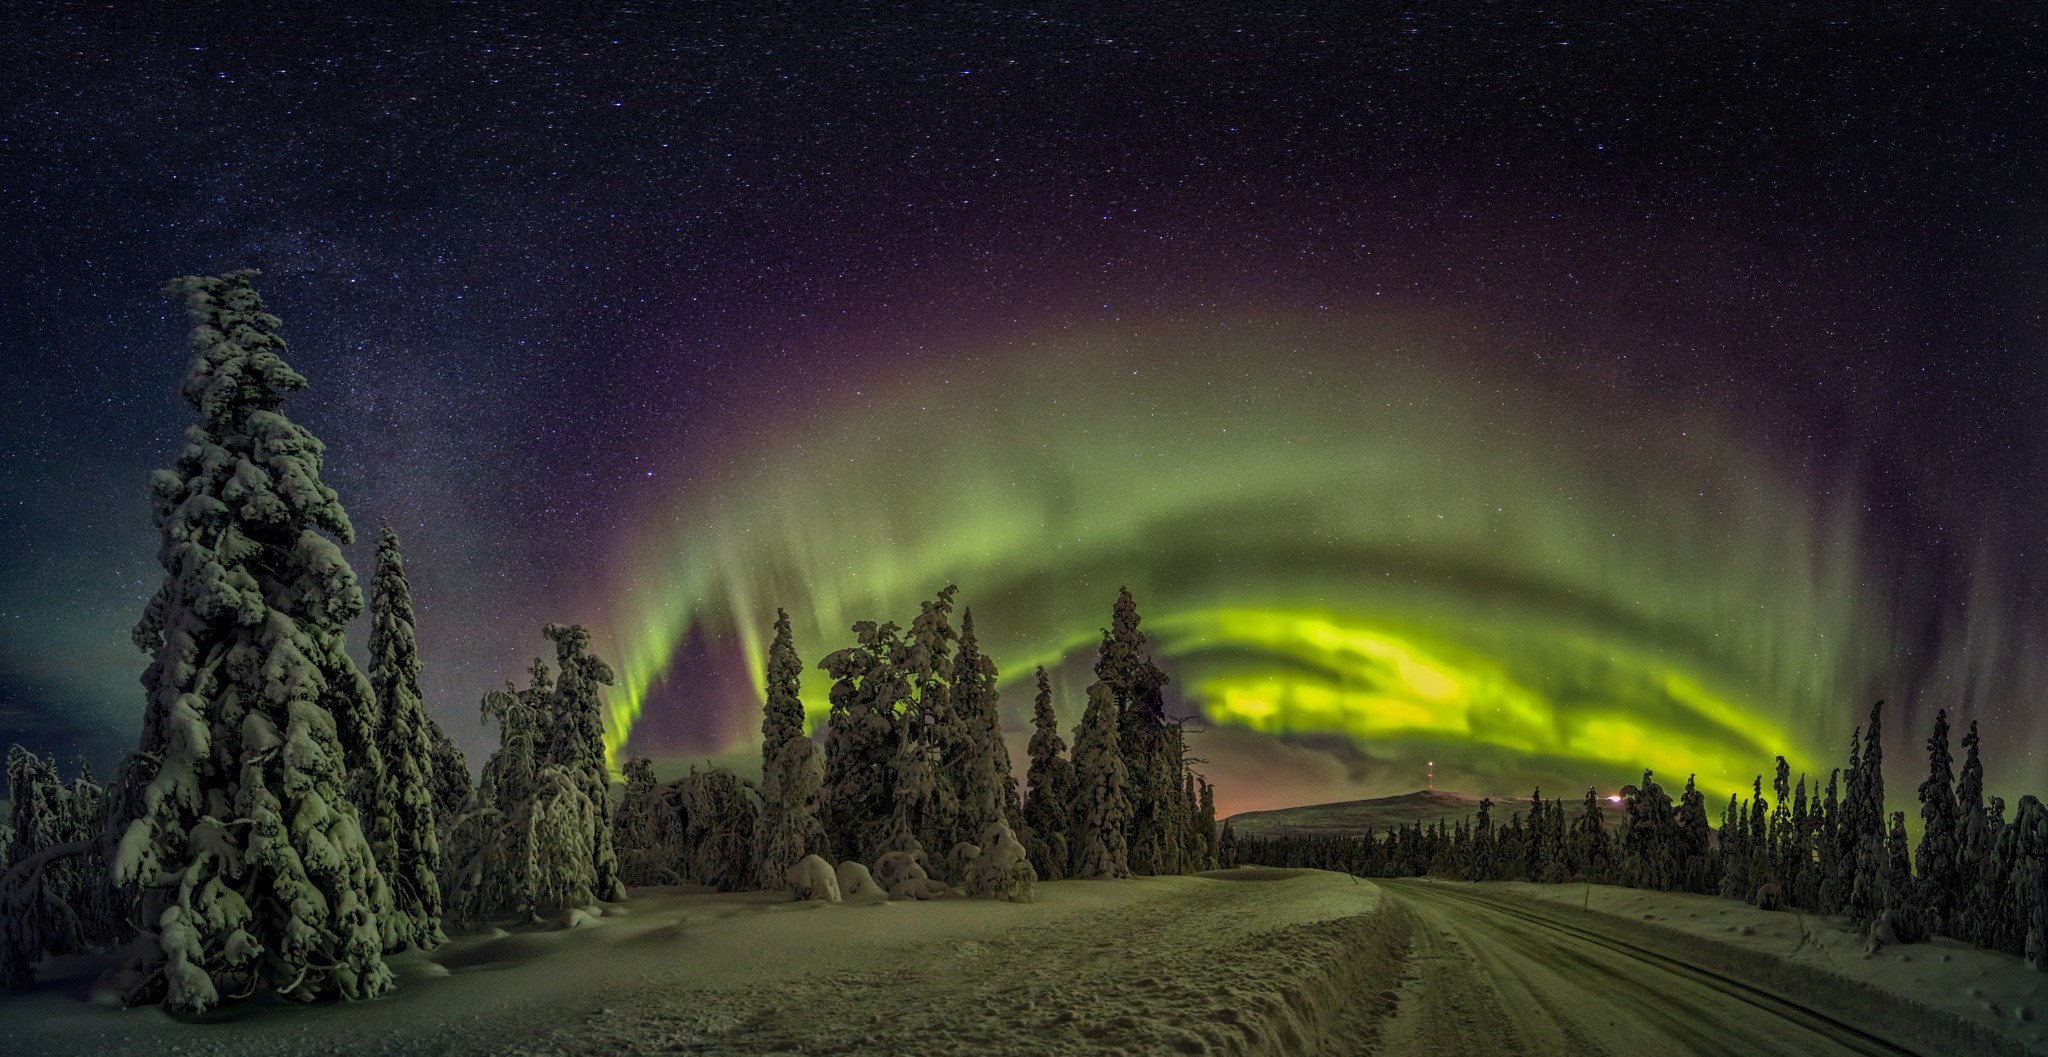 General 2048x1057 nature landscape Finland aurorae winter forest snow road lights cold trees nordic landscapes low light starry night